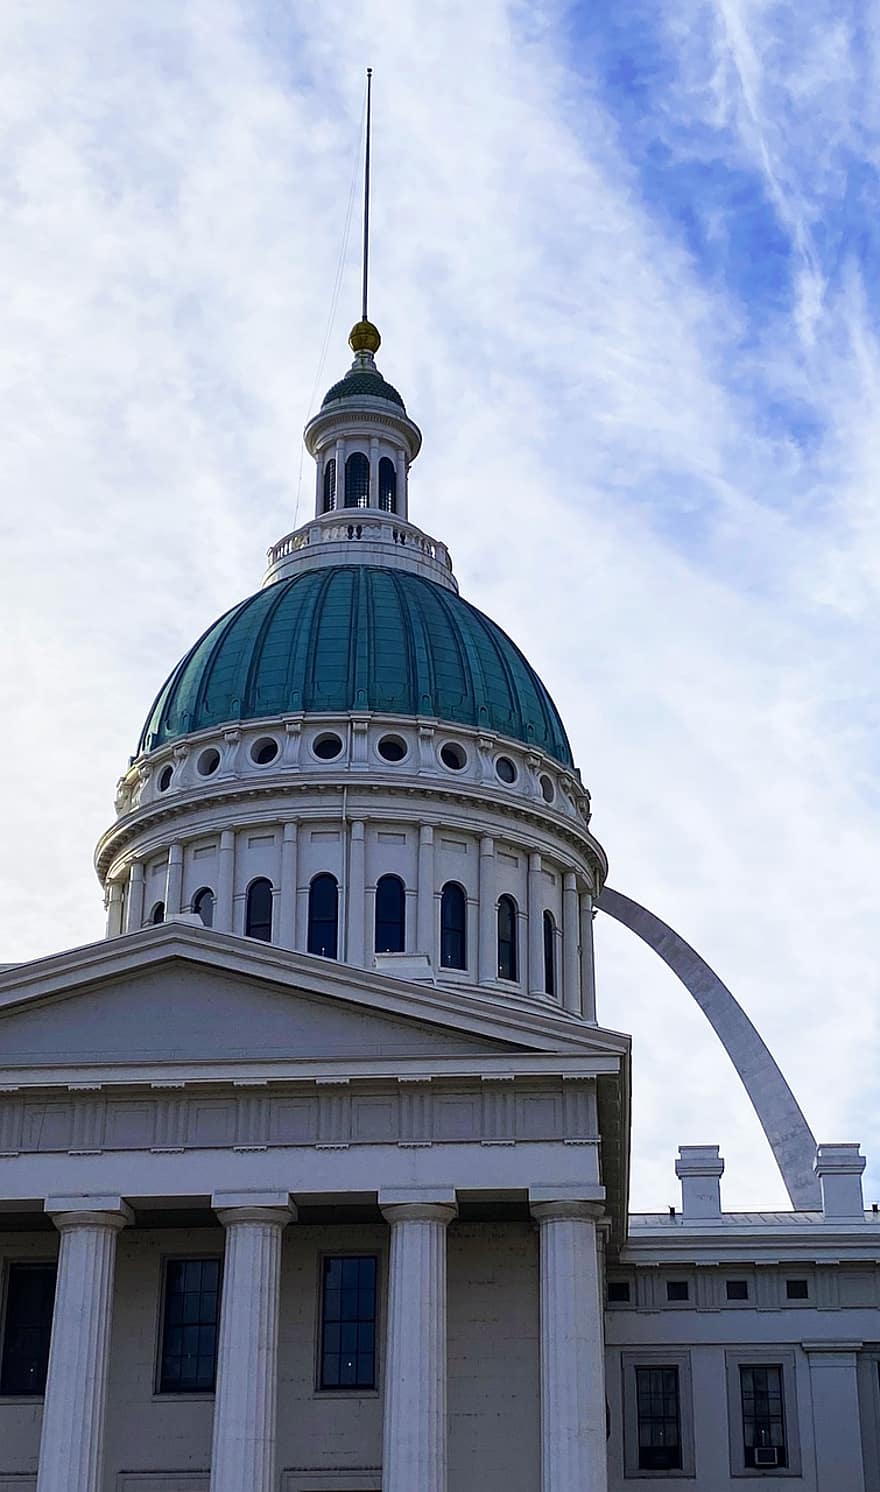 Old Courthouse, St Louis, Dome, Building, Architecture, Facade, Exterior, Landmark, Historic, Historical, Missouri